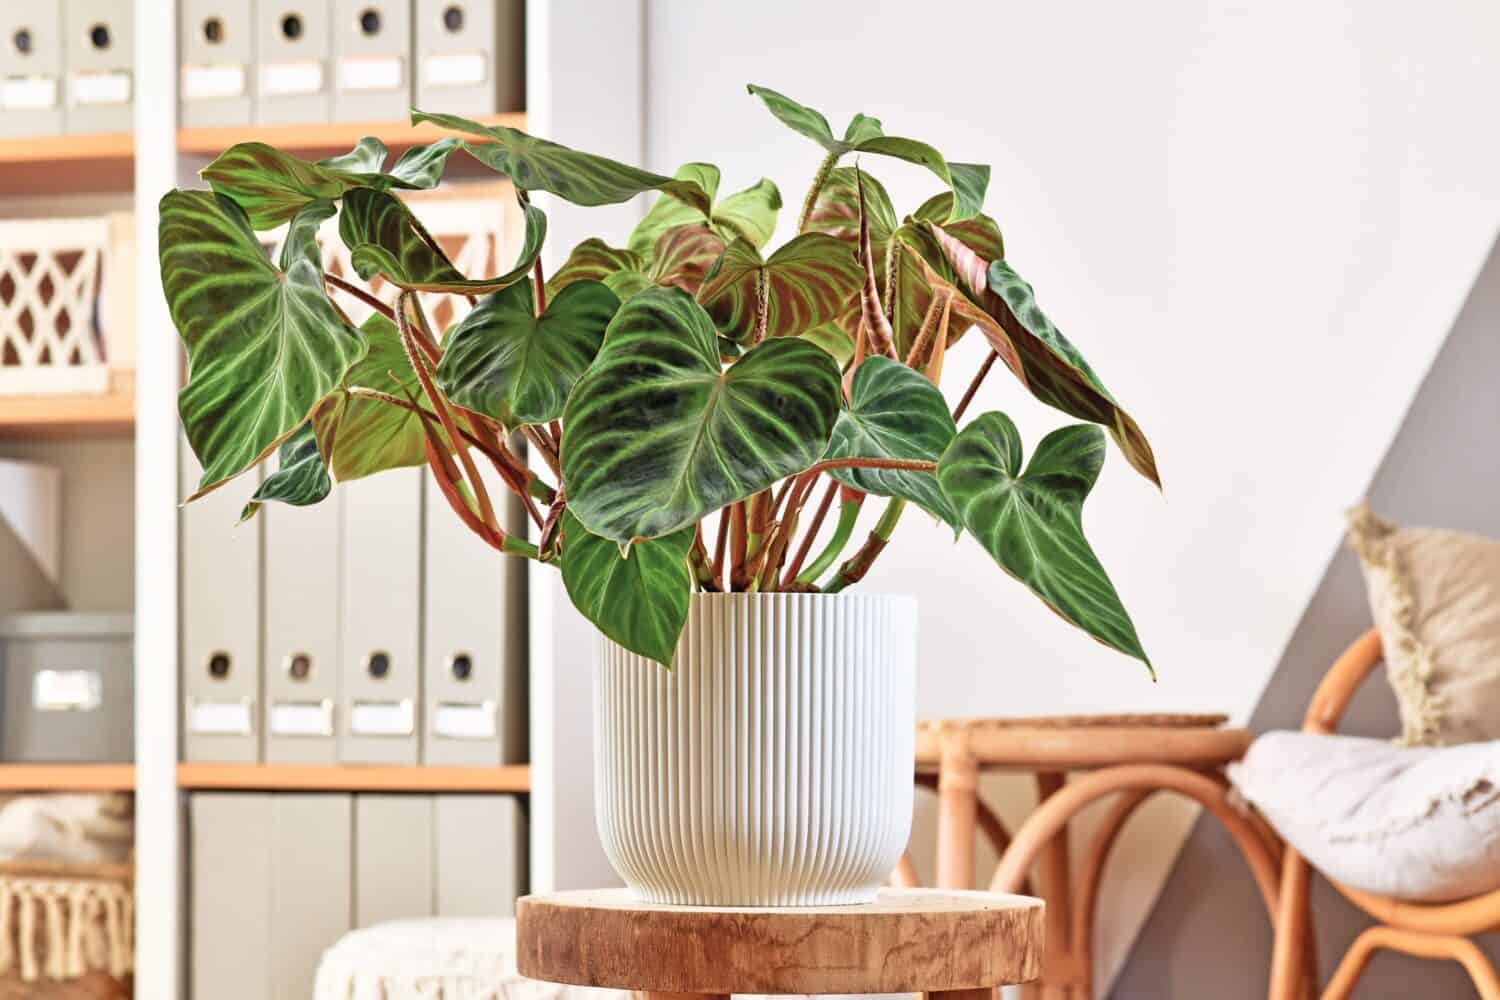 Lush topical 'Philodendron Verrucosum' houseplant with dark green veined velvety leaves in flower pot 